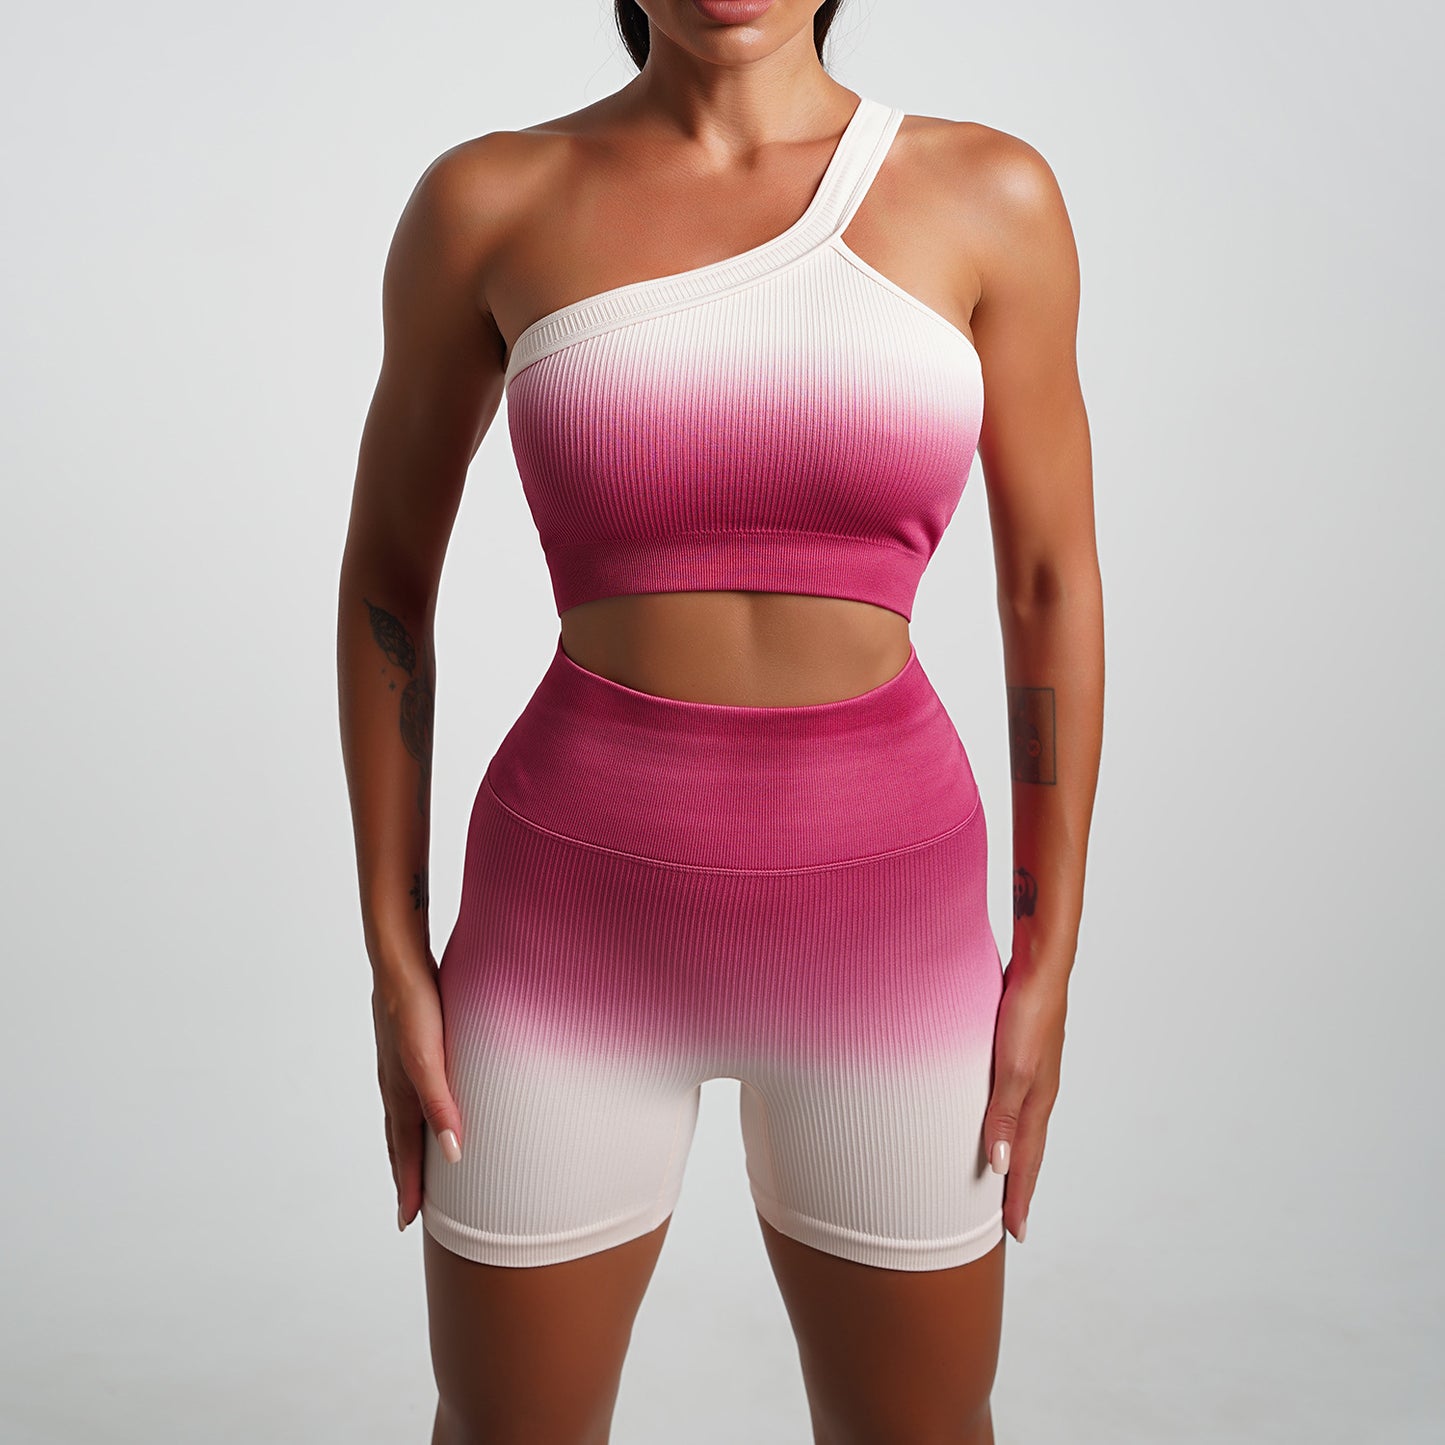 New Arrival Seamless Tight Yoga Suit Gradient Sports Fitness Elastic Two-piece Female 5 Colors